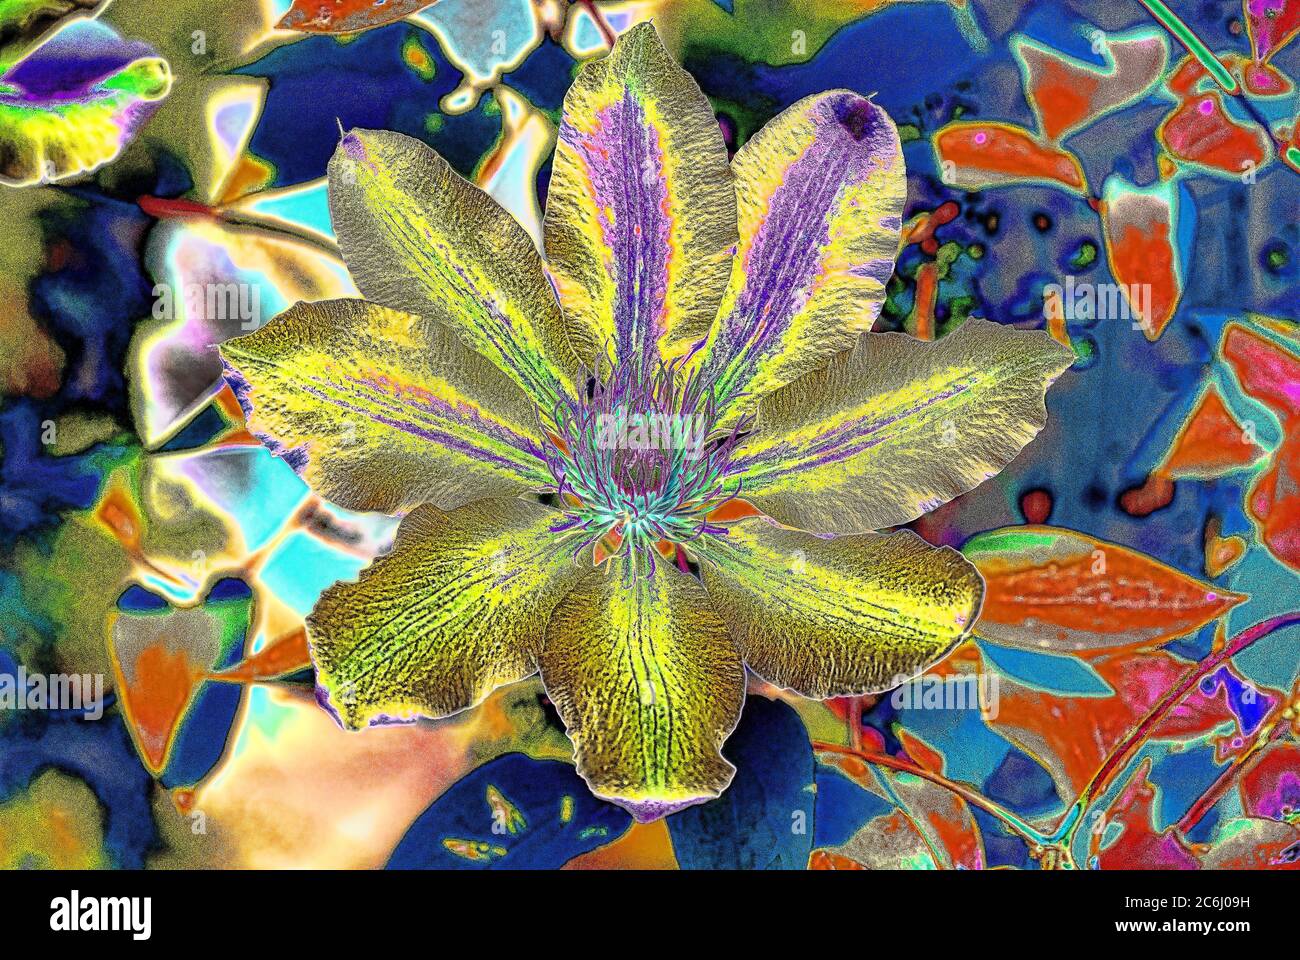 Digitally manipulated macro flower image. Psychedelic, Brilliant colours. Conceptual.  Green and blue shades, alstroemeria flower heads arrangement. Stock Photo